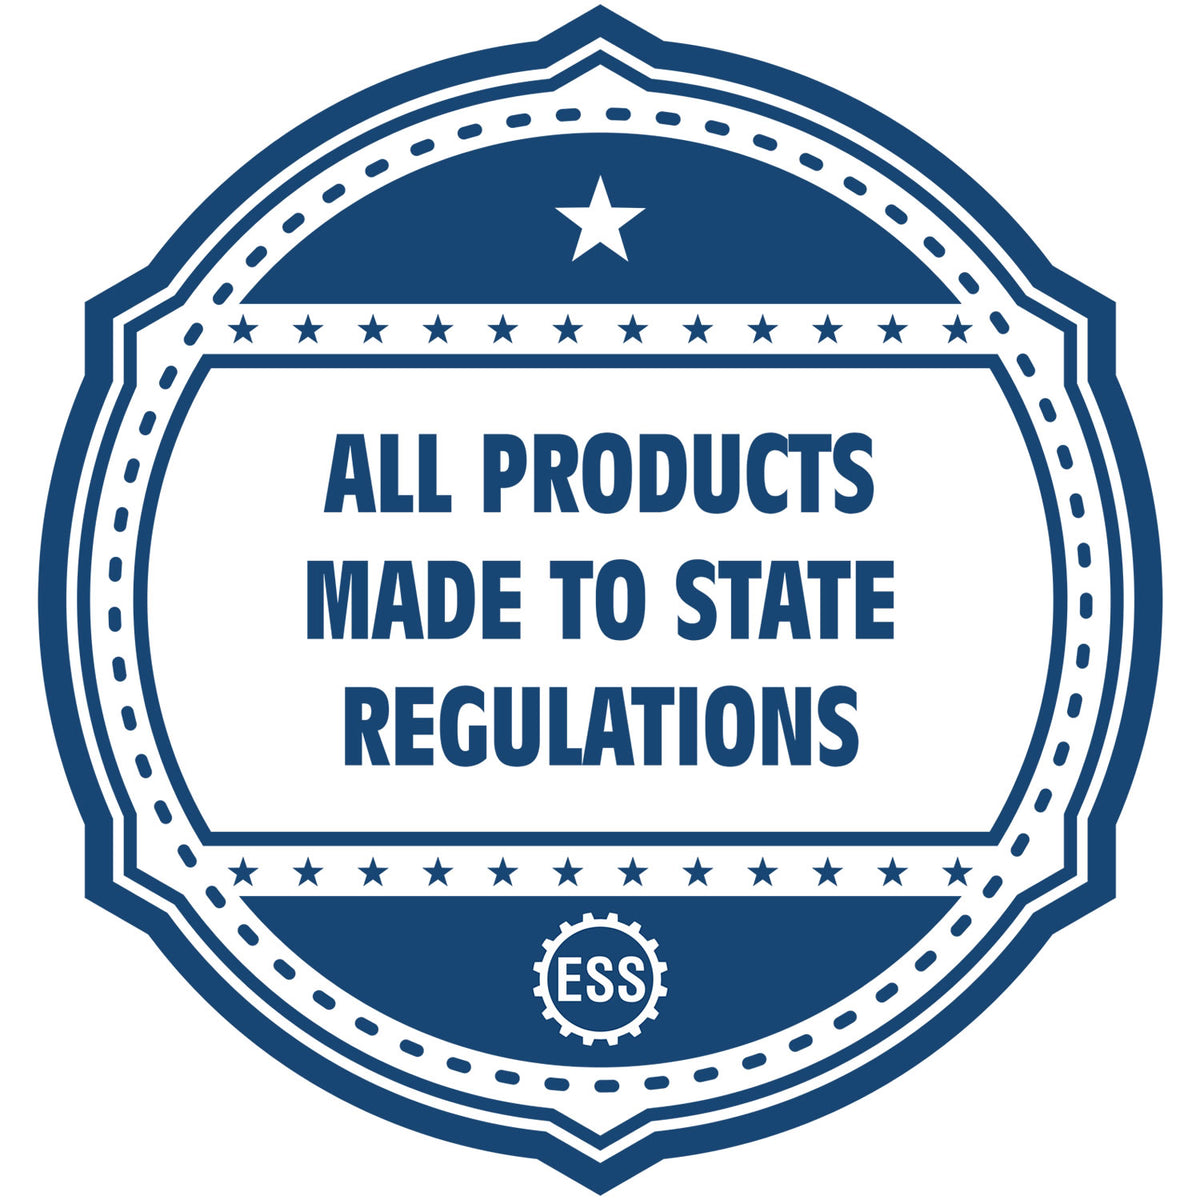 An icon or badge element for the Soft Iowa Professional Engineer Seal showing that this product is made in compliance with state regulations.